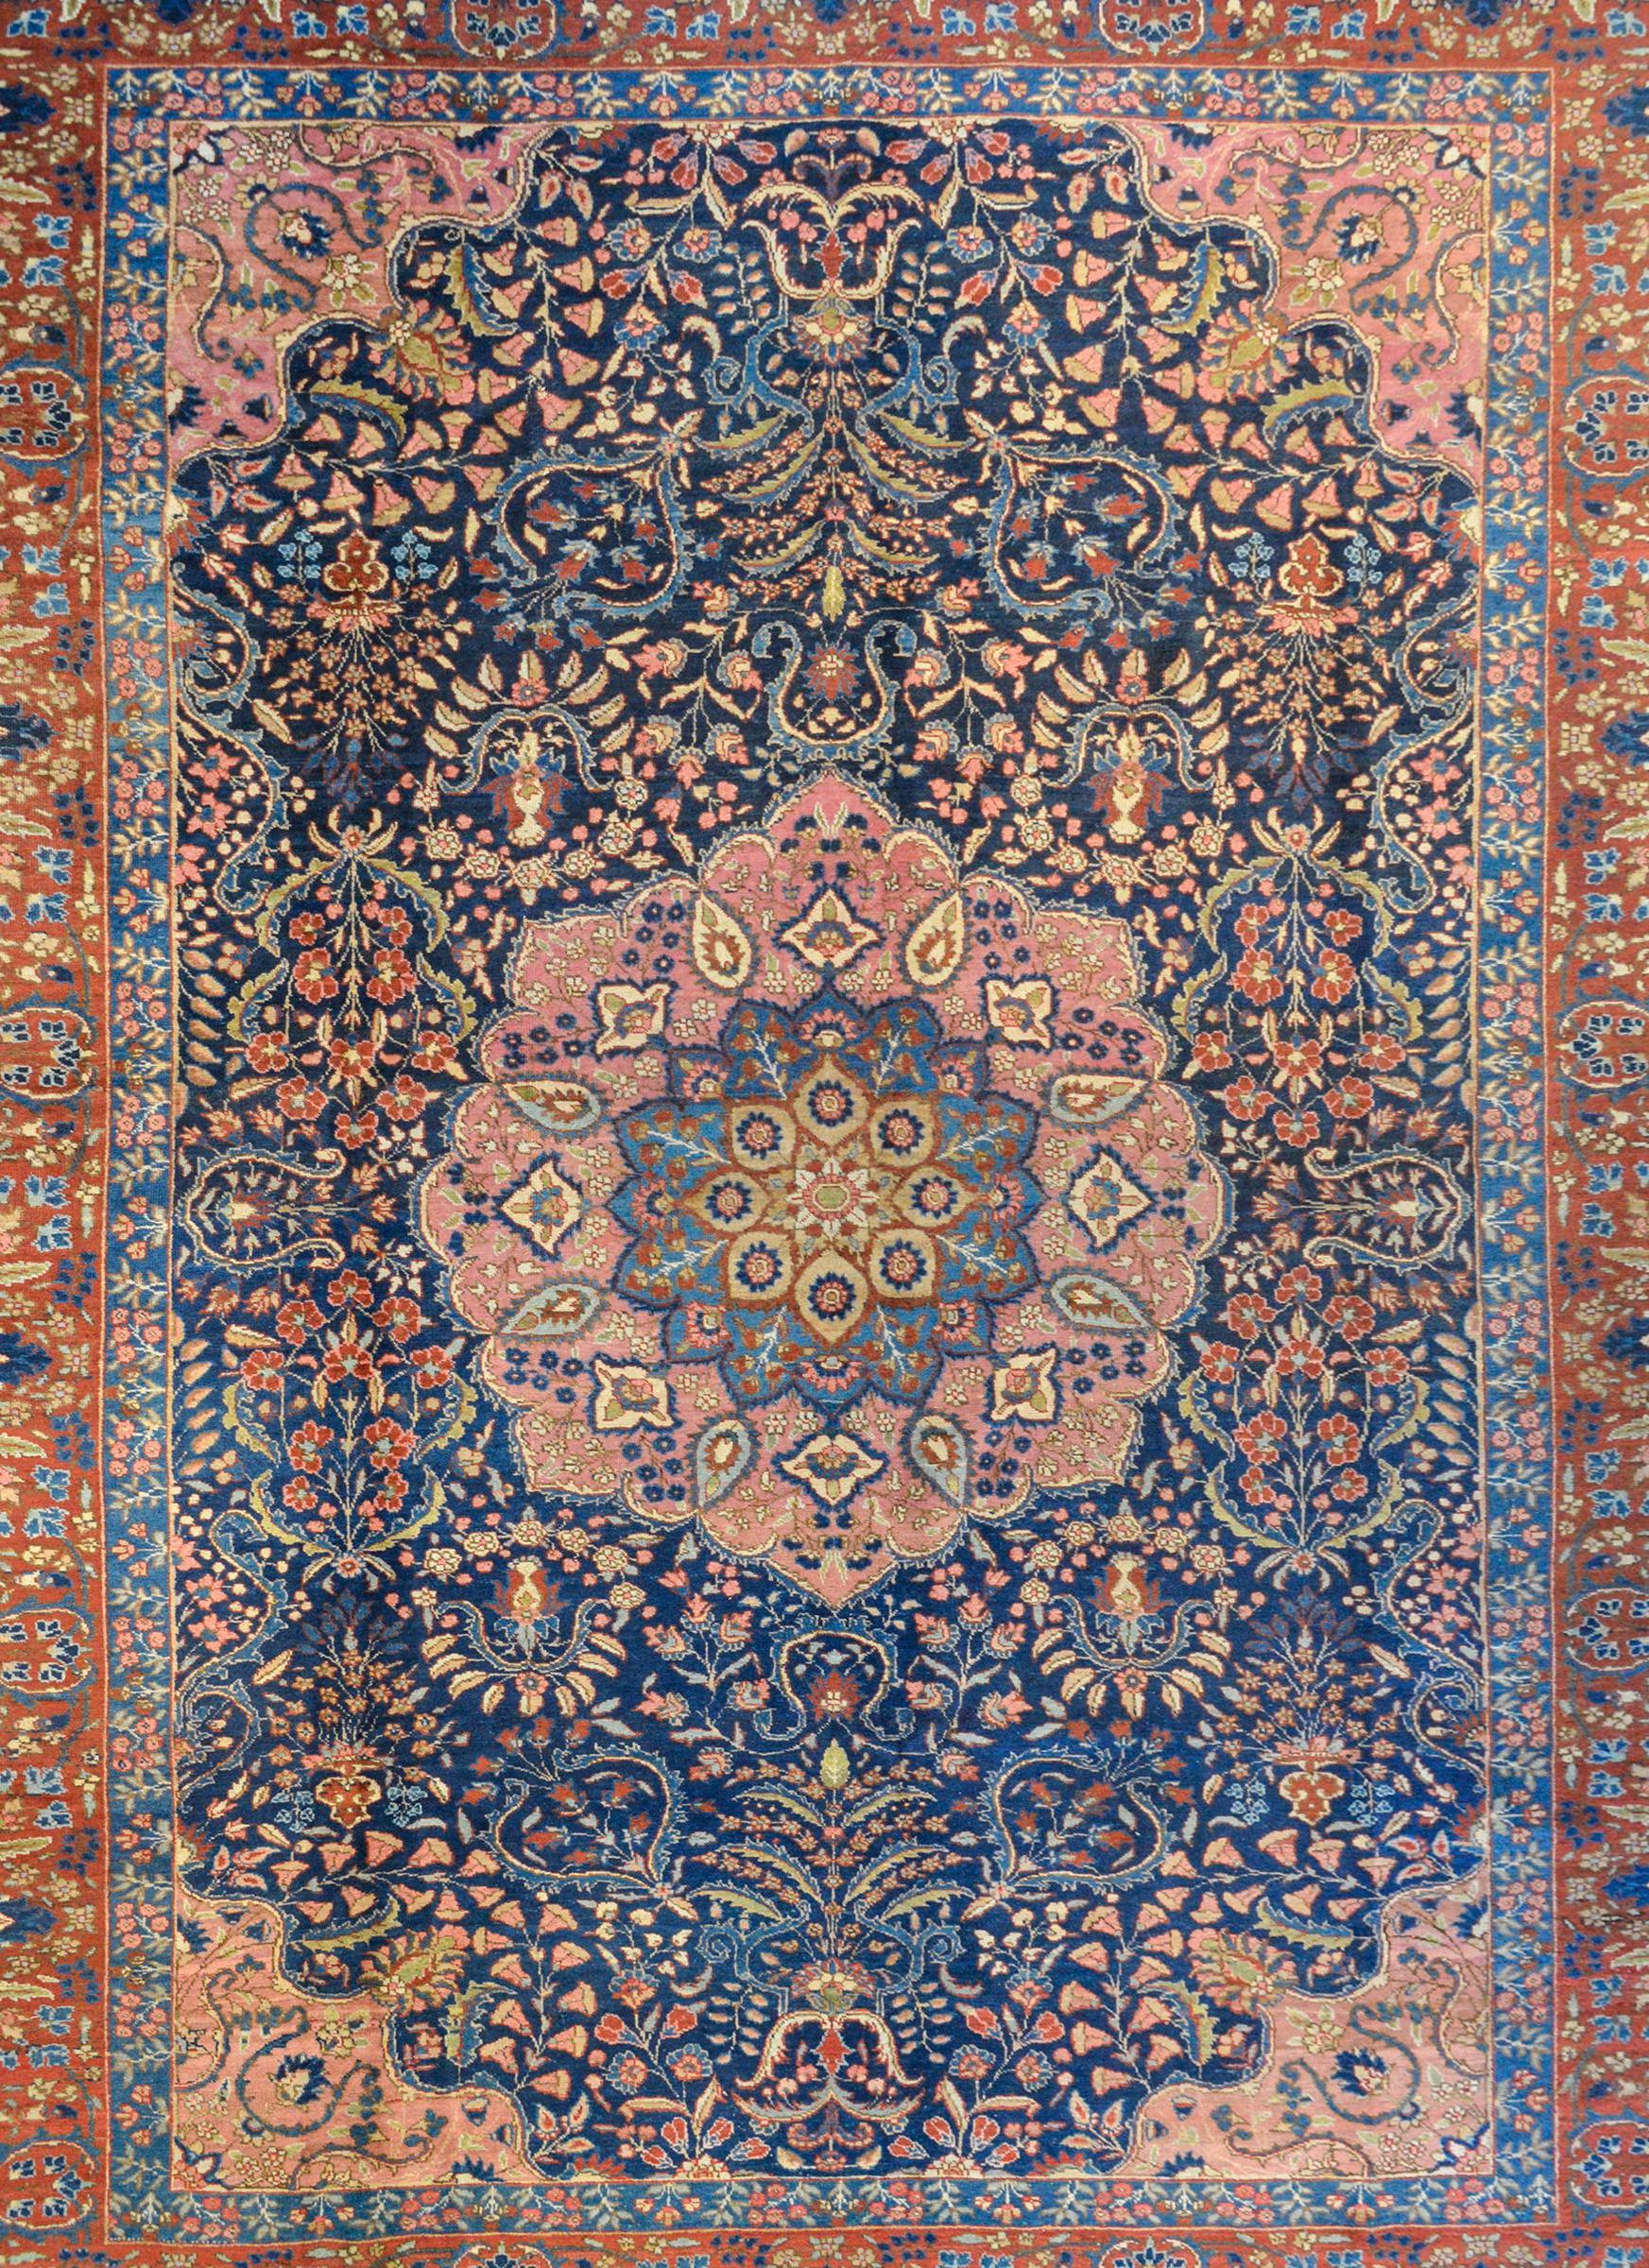 An extraordinary early 20th century Persian Tabriz rug with a beautiful large round floral medallion woven with a petite floral and scrolling vine pattern rendered in crimson, gold, light and dark indigo, green, and pink. The medallion lives on a